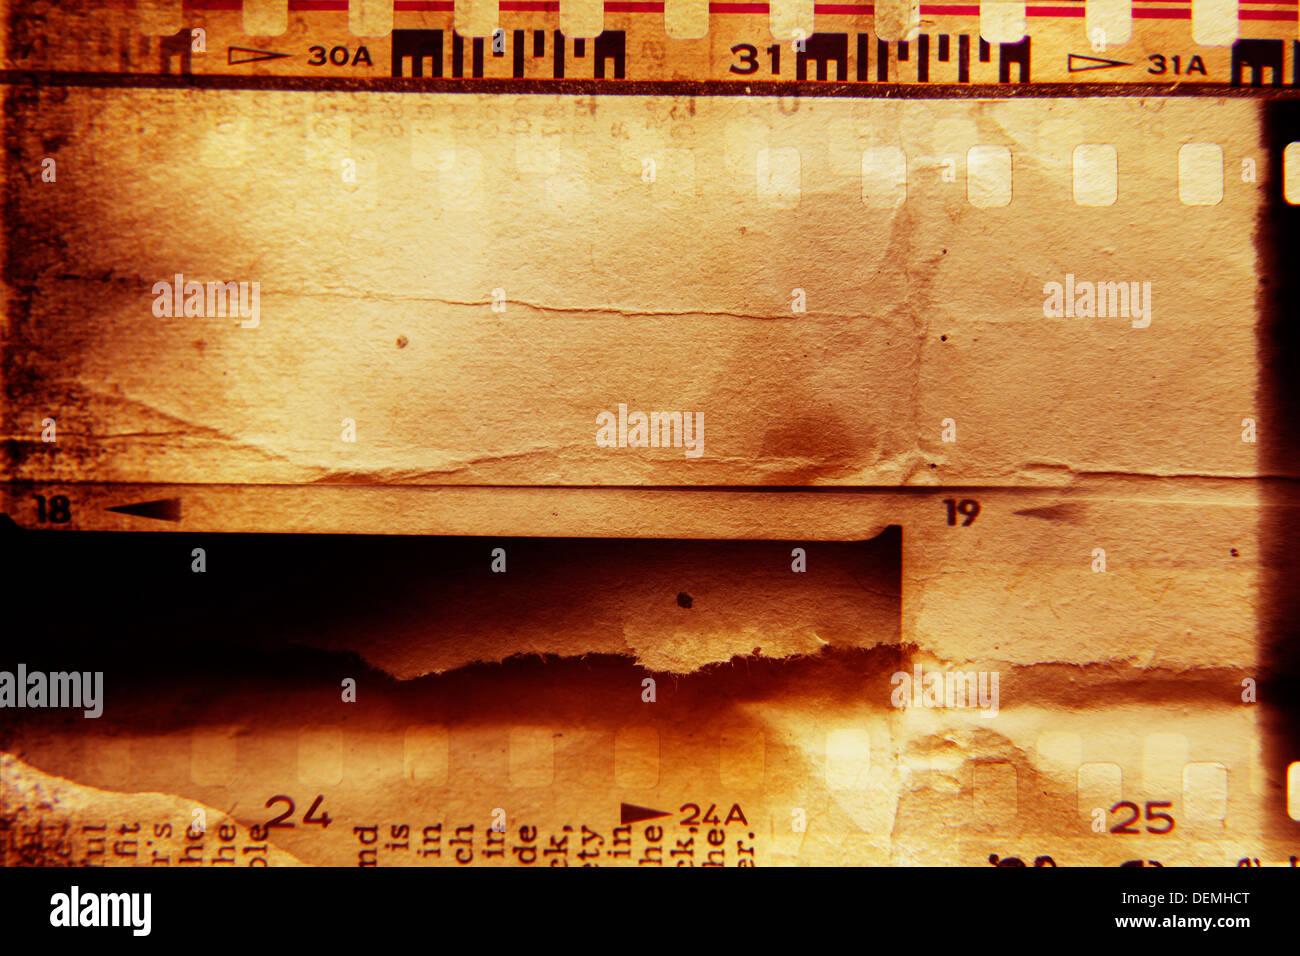 Film strips and grunge paper Stock Photo